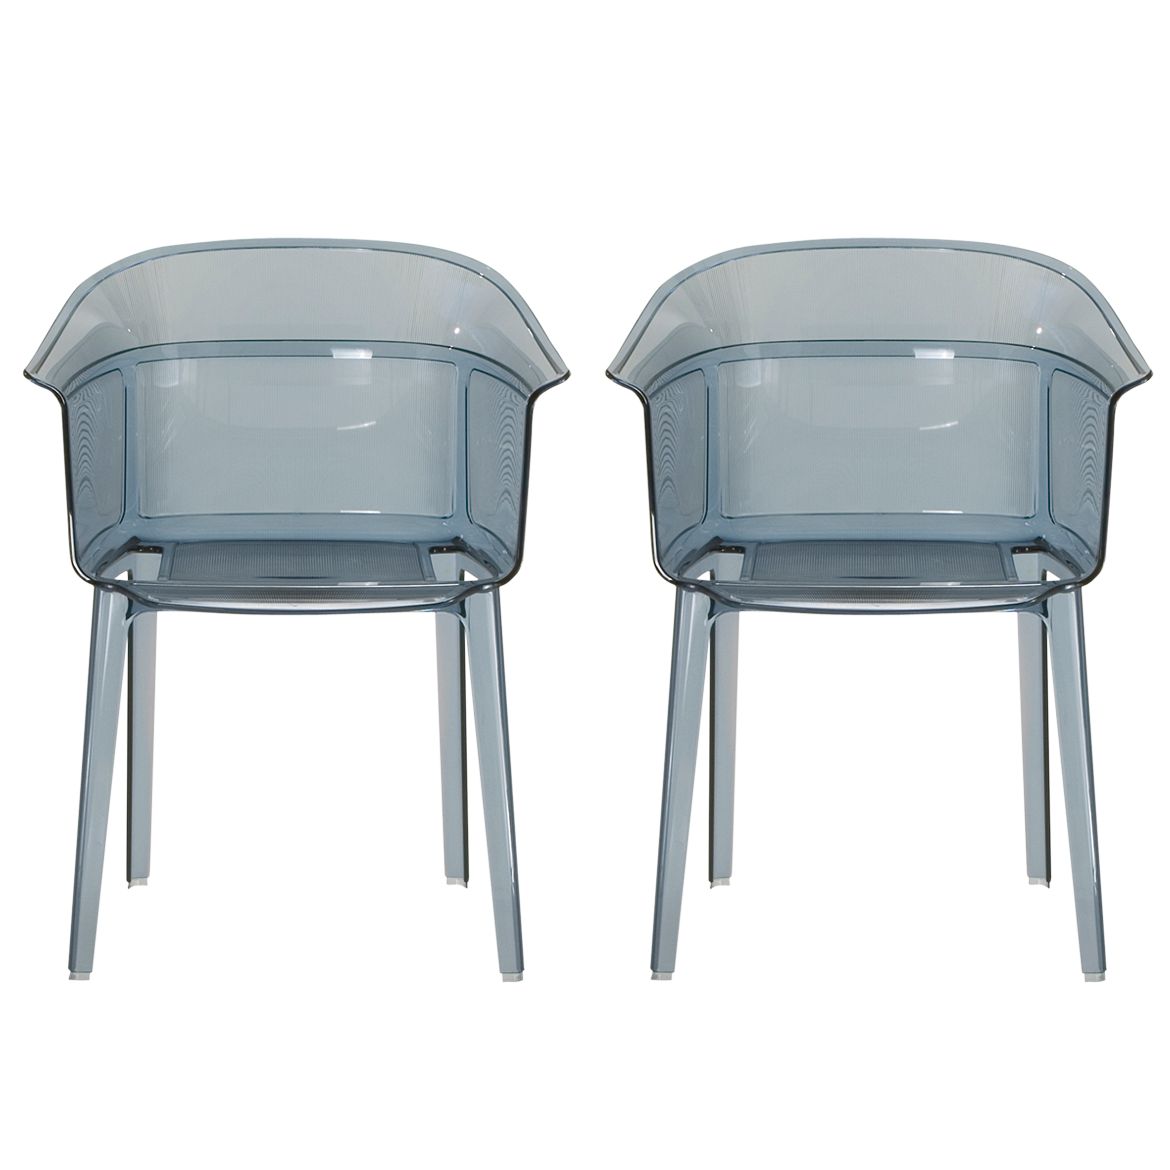 Bouroullec Brothers for Kartell Papyrus Chair, Powder Blue, Pair at JohnLewis